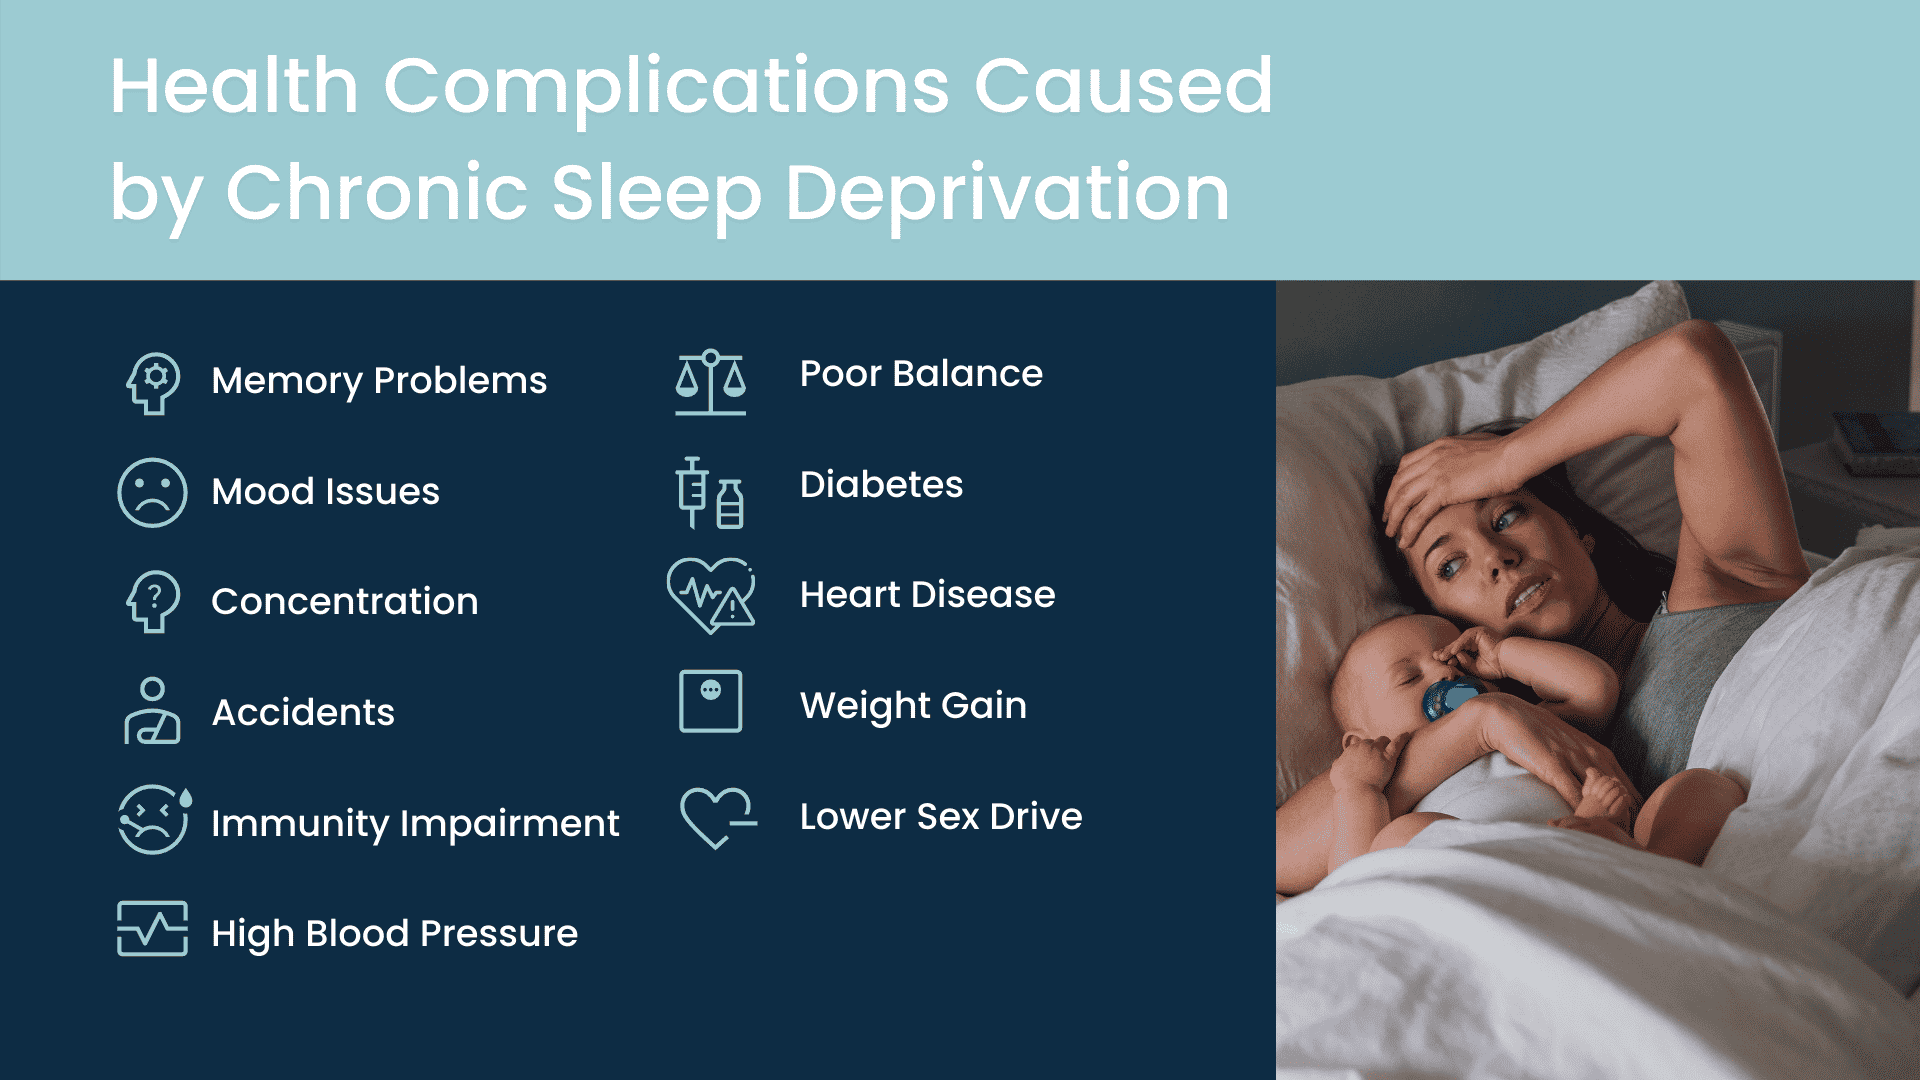 Health complications list caused by chronic sleep deprivation.